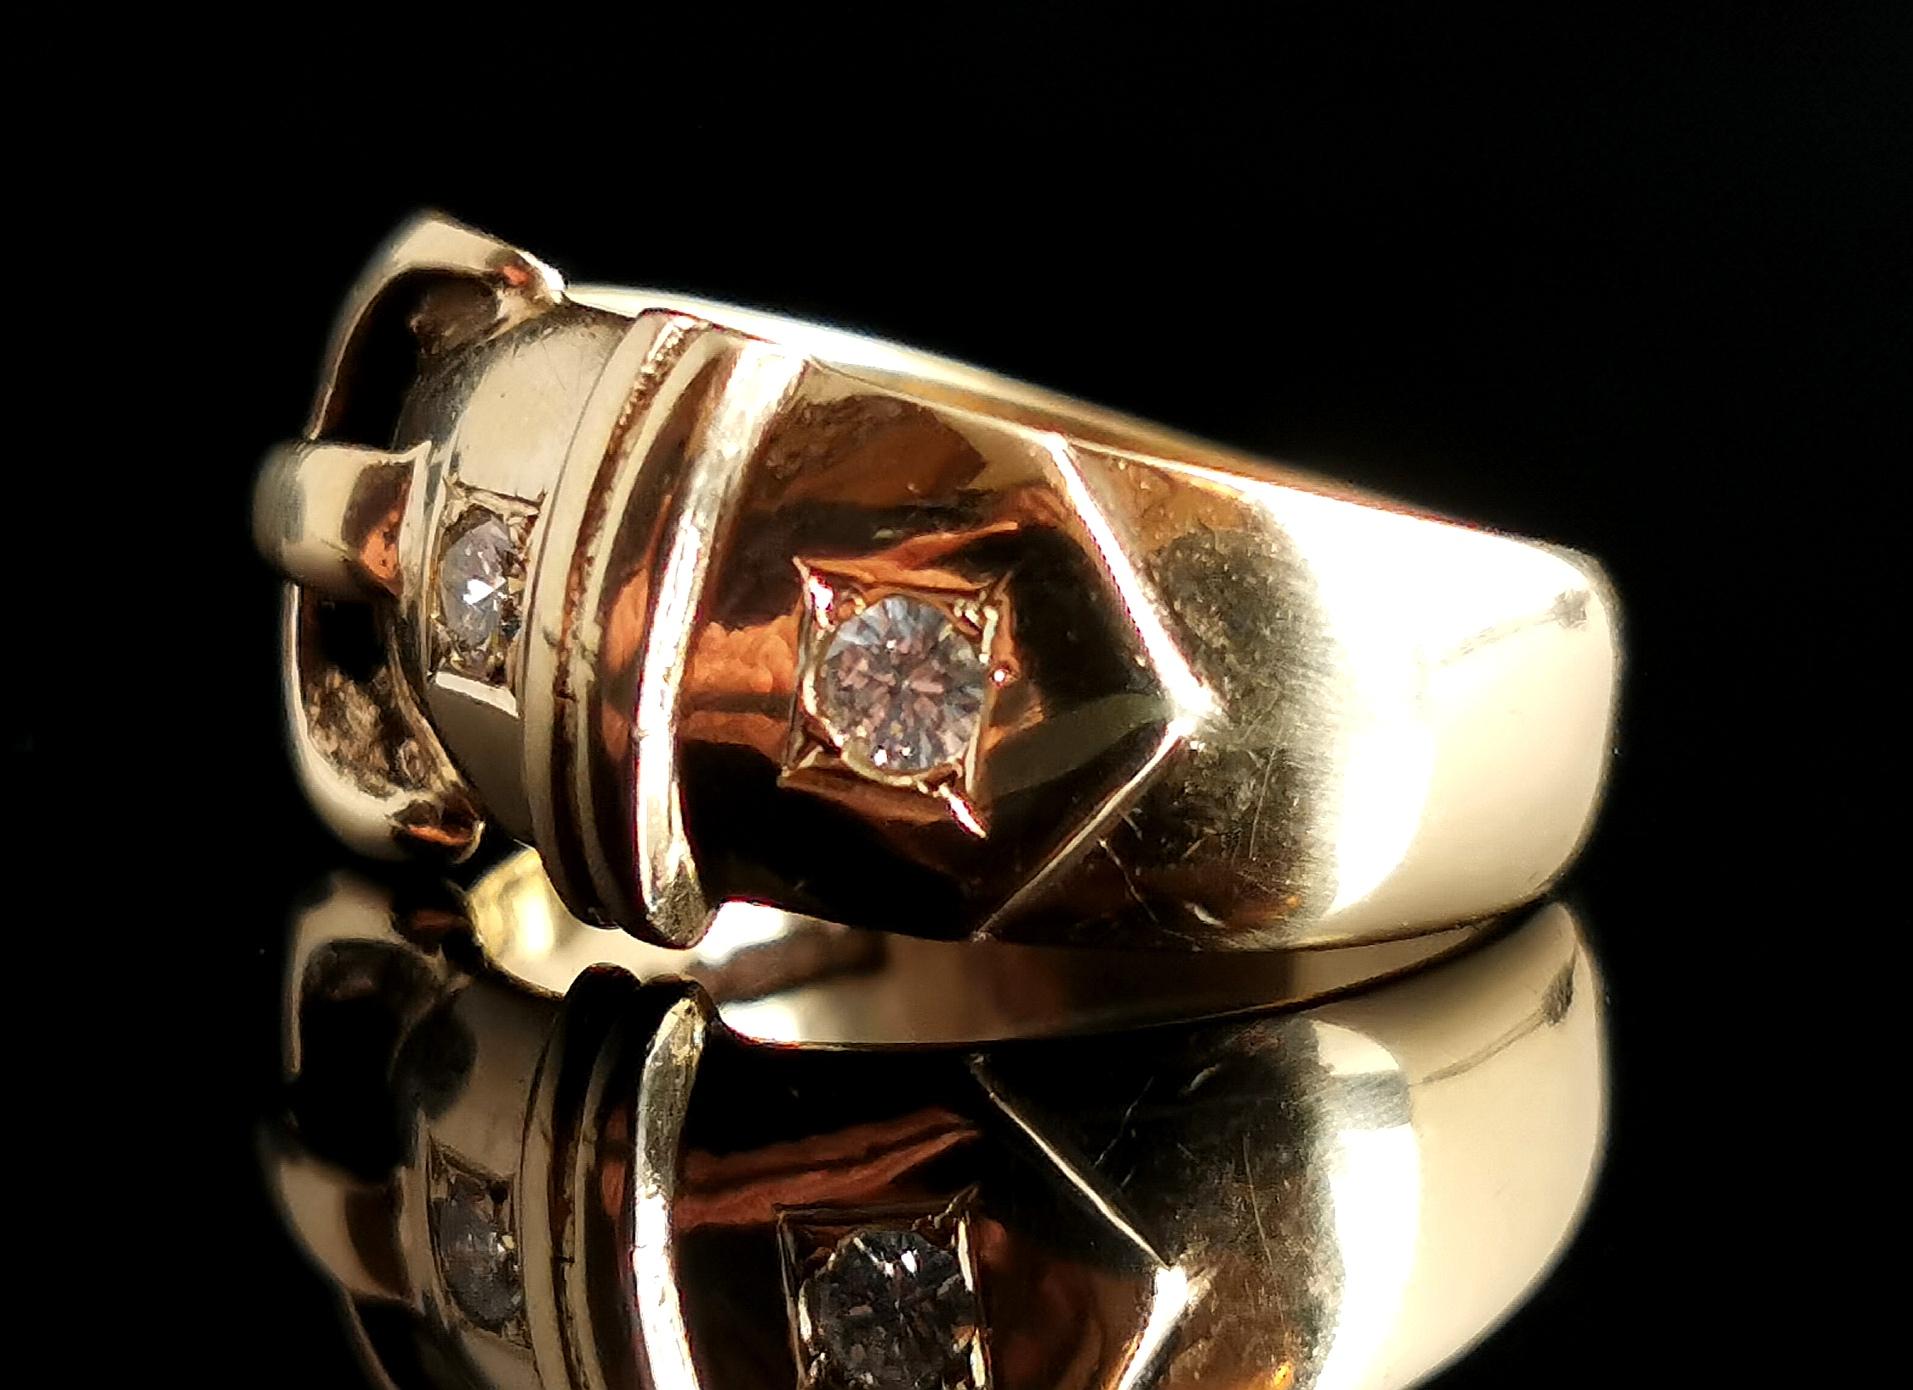 Fall in love with this gorgeous vintage 9kt gold and Diamond buckle ring.

This is an exceptionally well made buckle ring, very high quality with two beautiful brilliant cut diamonds giving plenty of sparkle.

The ring is designed as a belt and